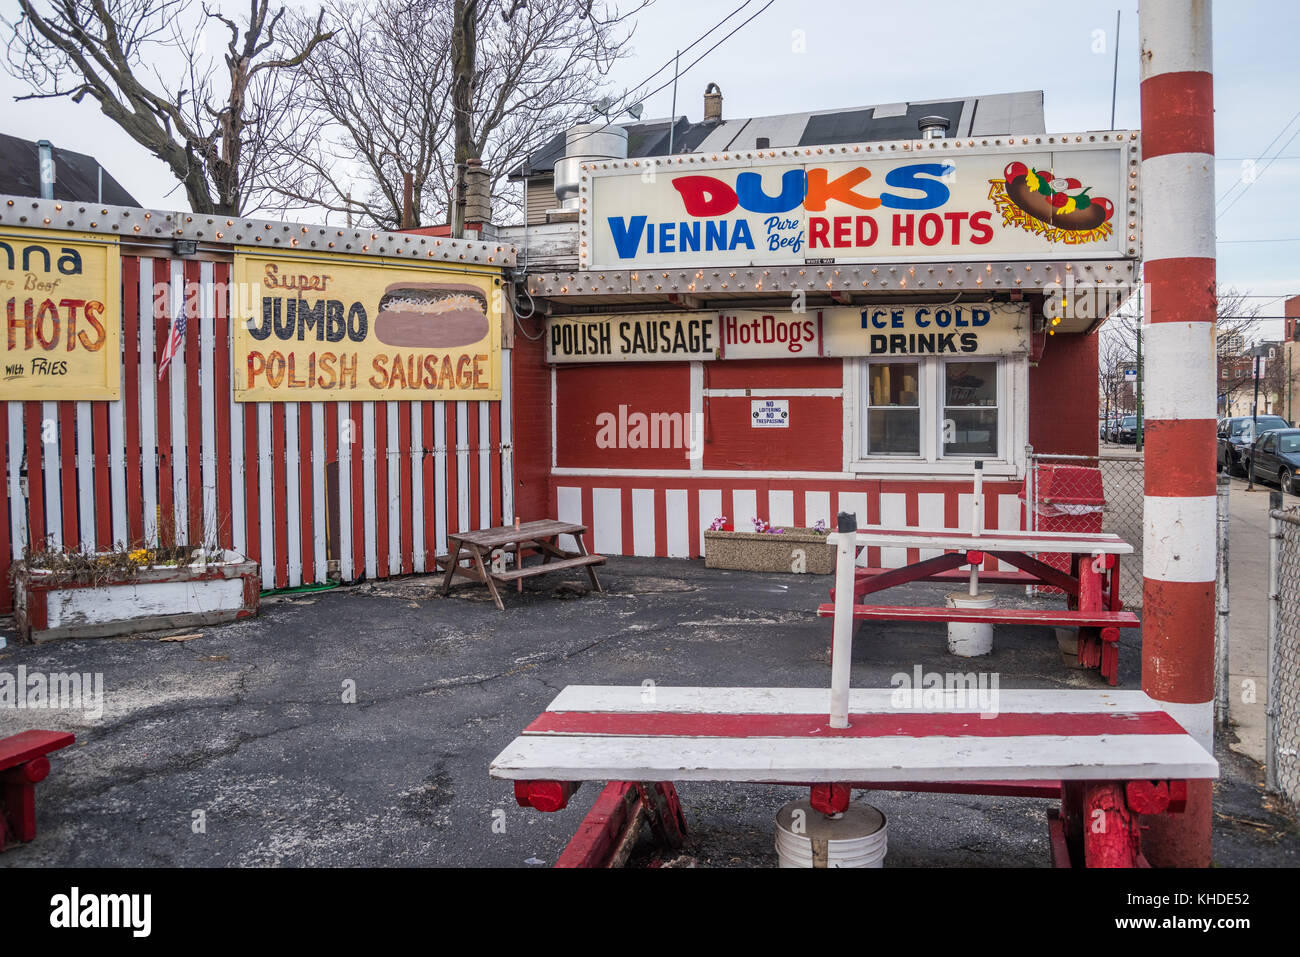 https://c8.alamy.com/comp/KHDE52/exterior-of-duks-hot-dog-stand-in-west-town-KHDE52.jpg